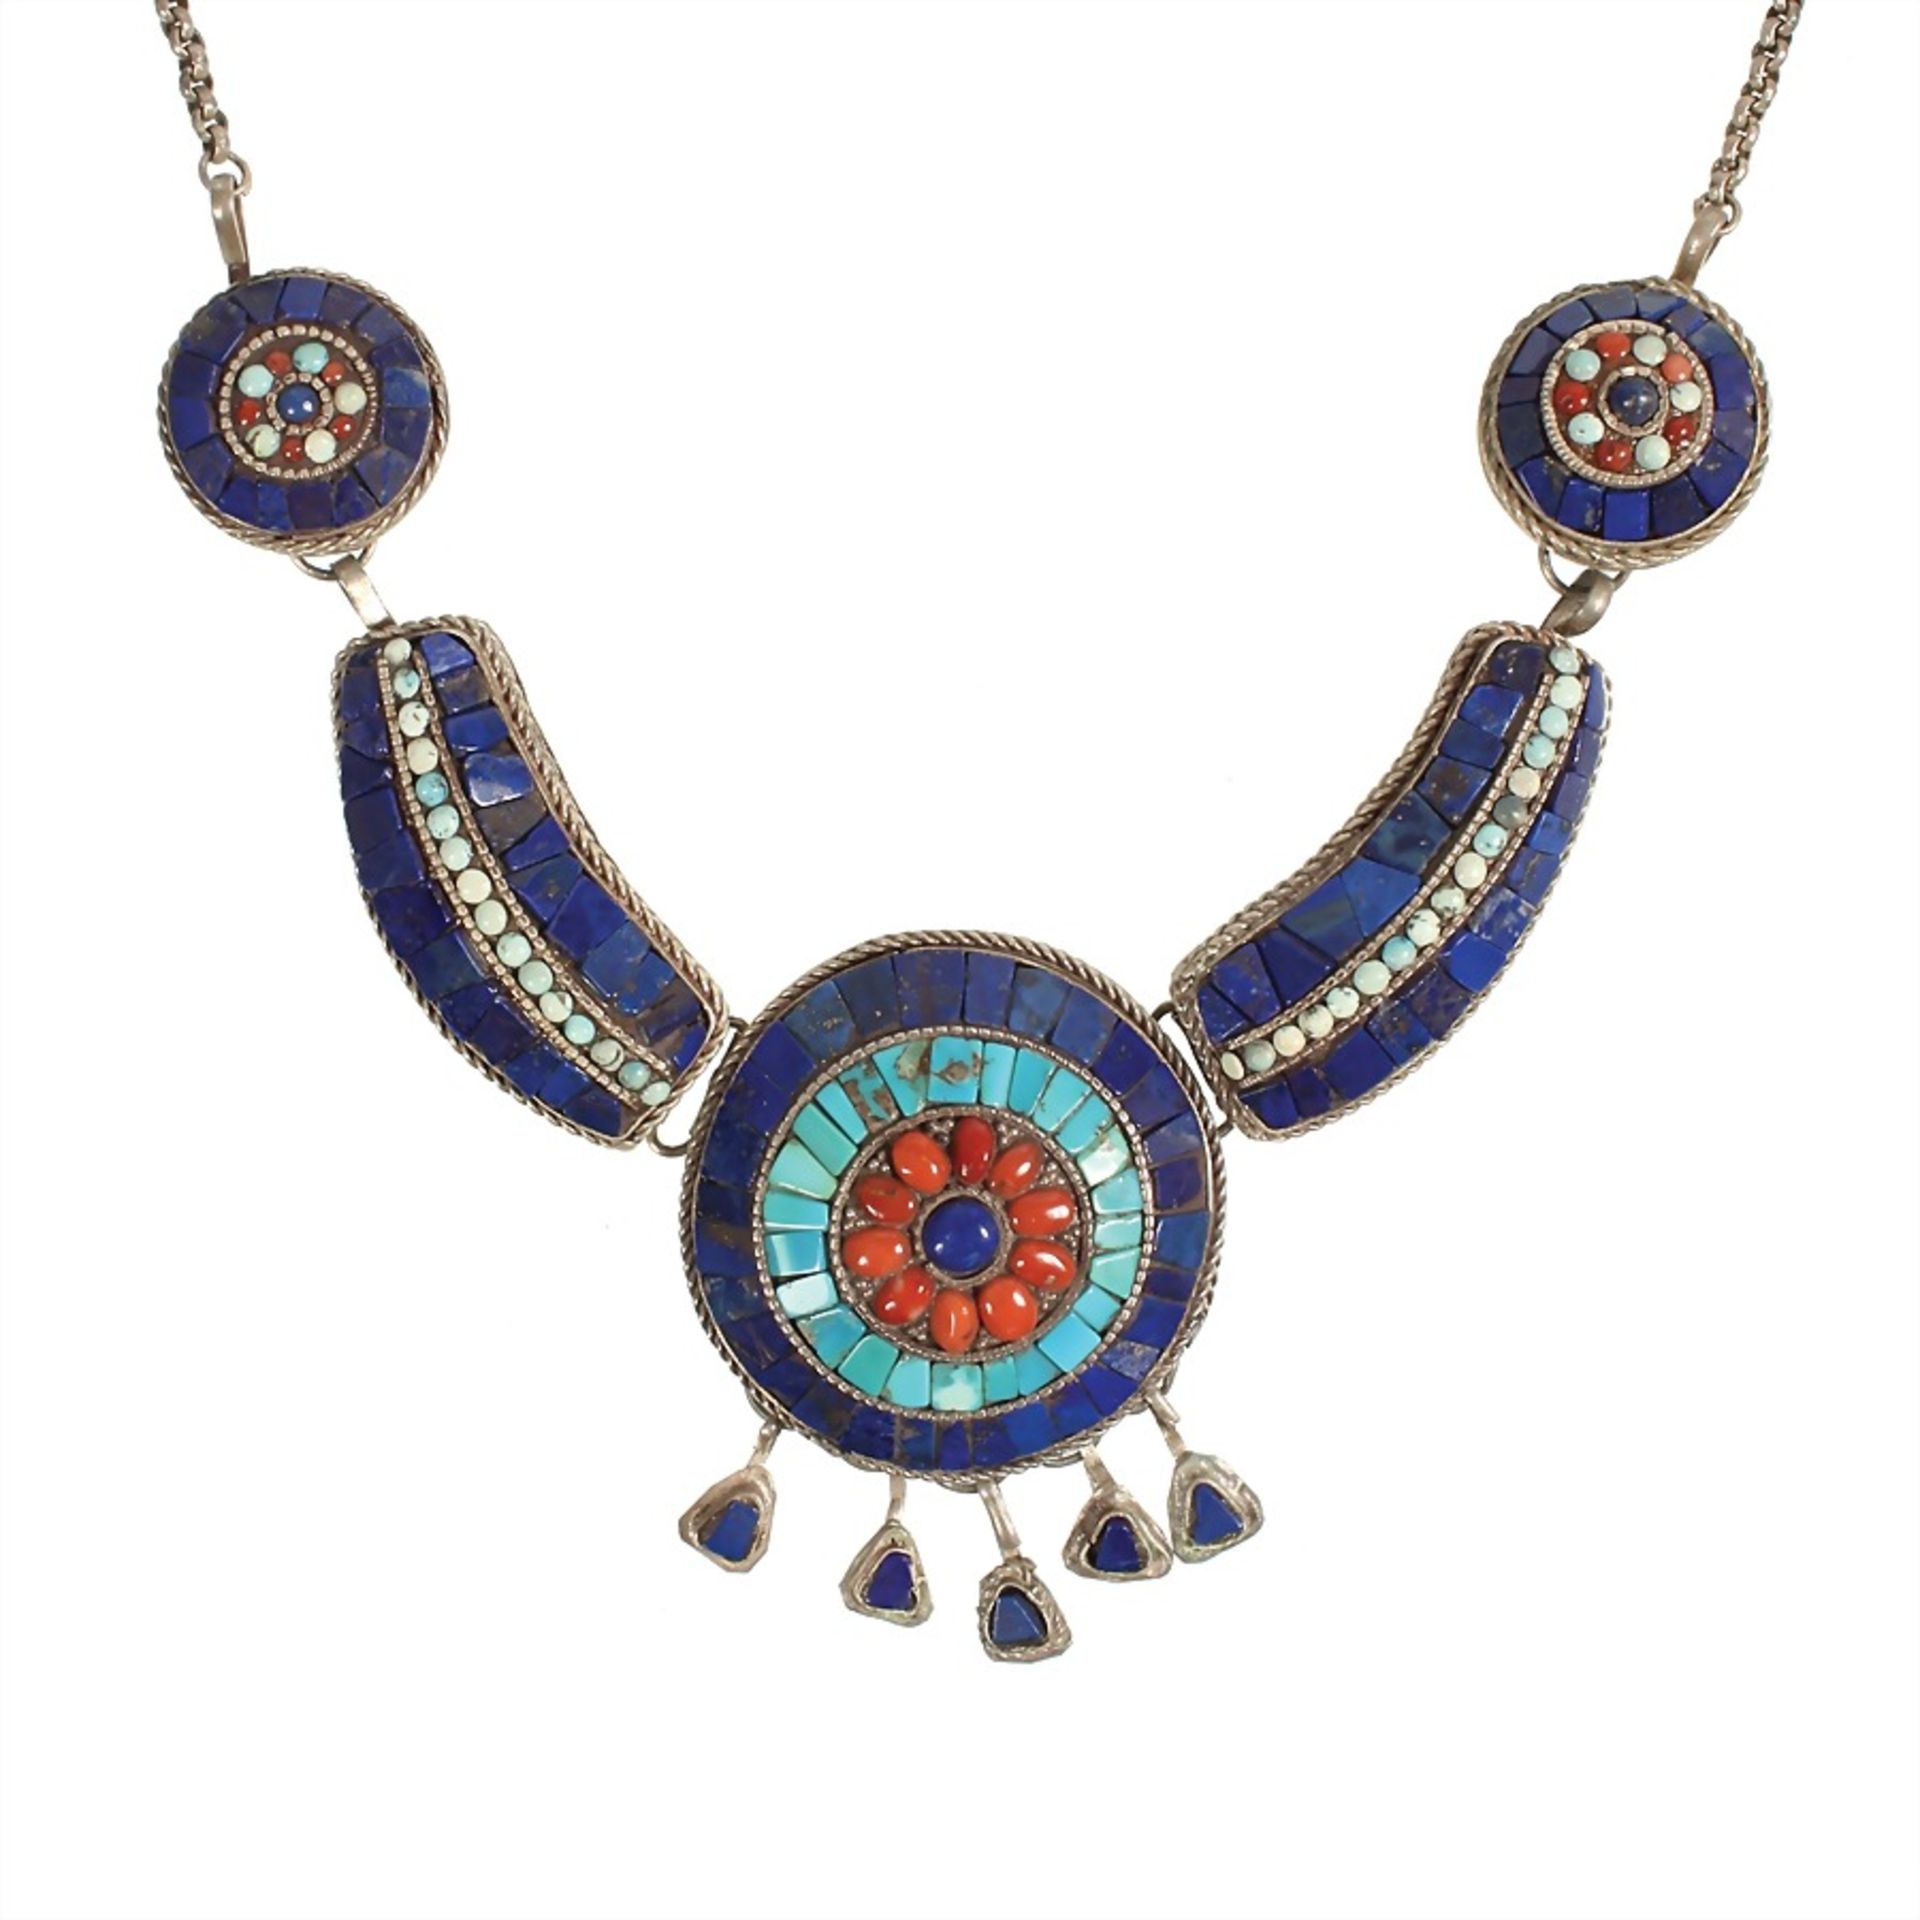 necklace, silver (checked), decorative inlaid work with lapis lazuli and turquoises, circle in the